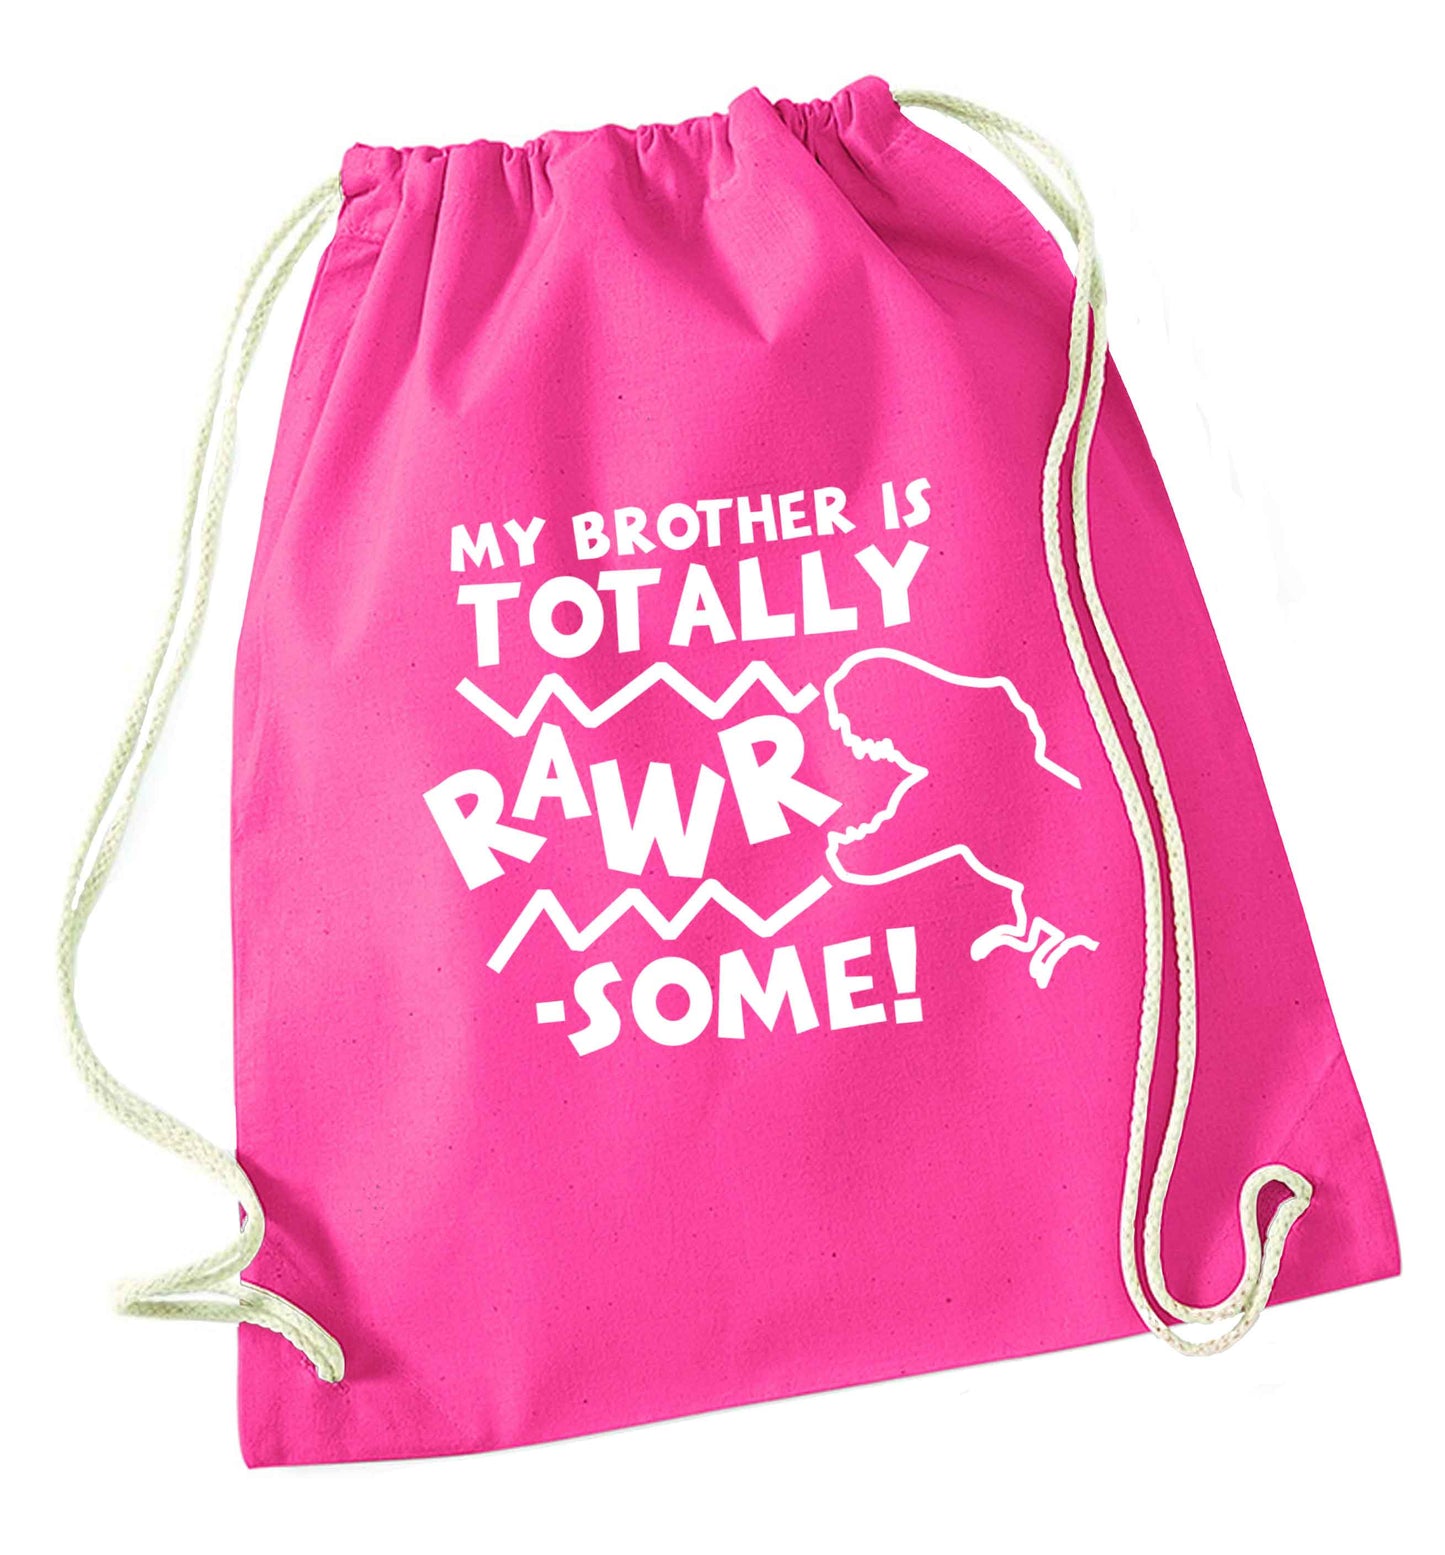 My brother is totally rawrsome pink drawstring bag